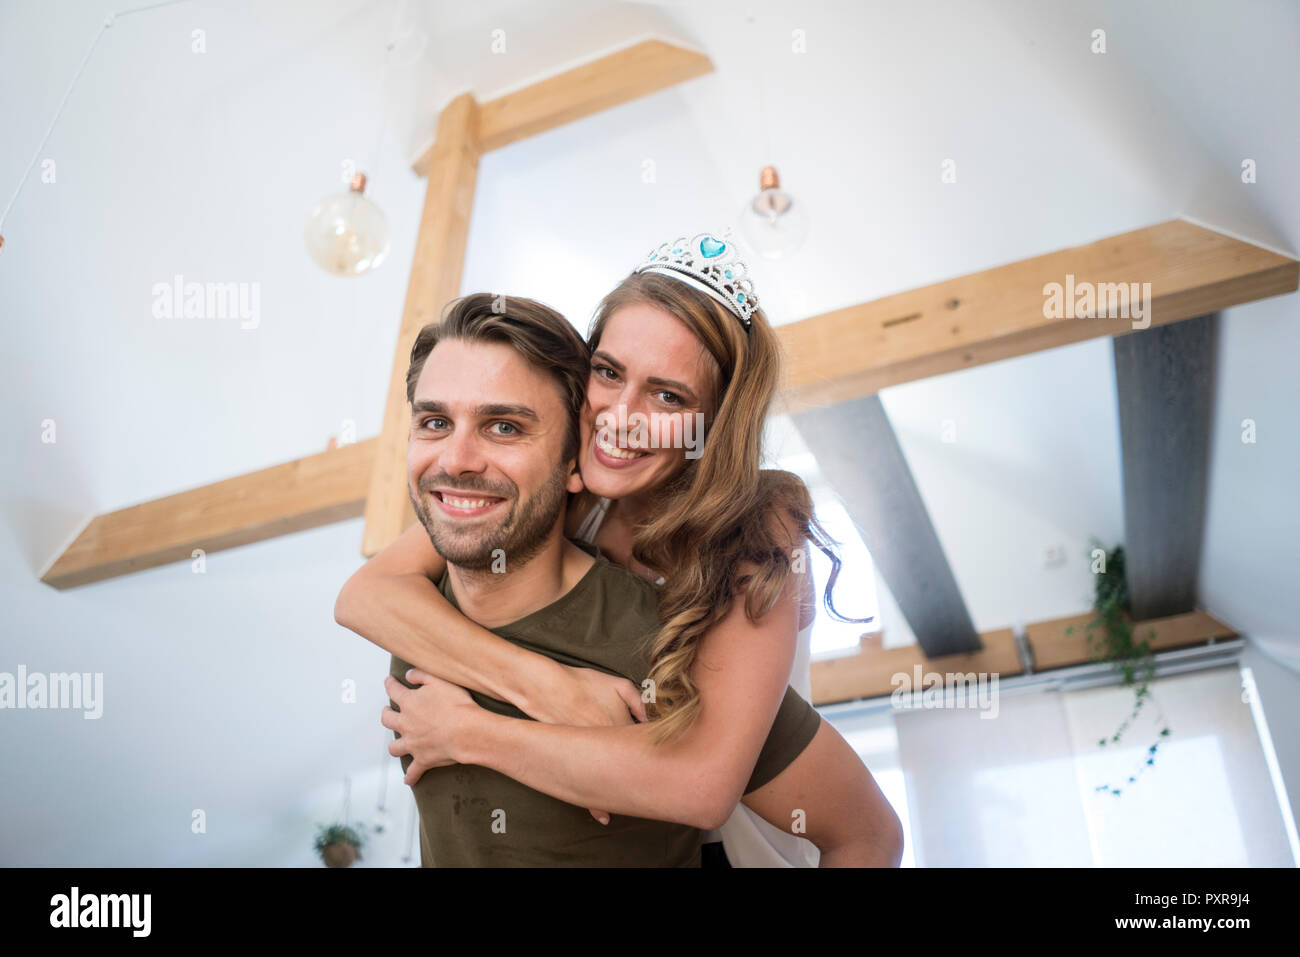 Portrait of happy couple at home with woman wearing tiara Stock Photo